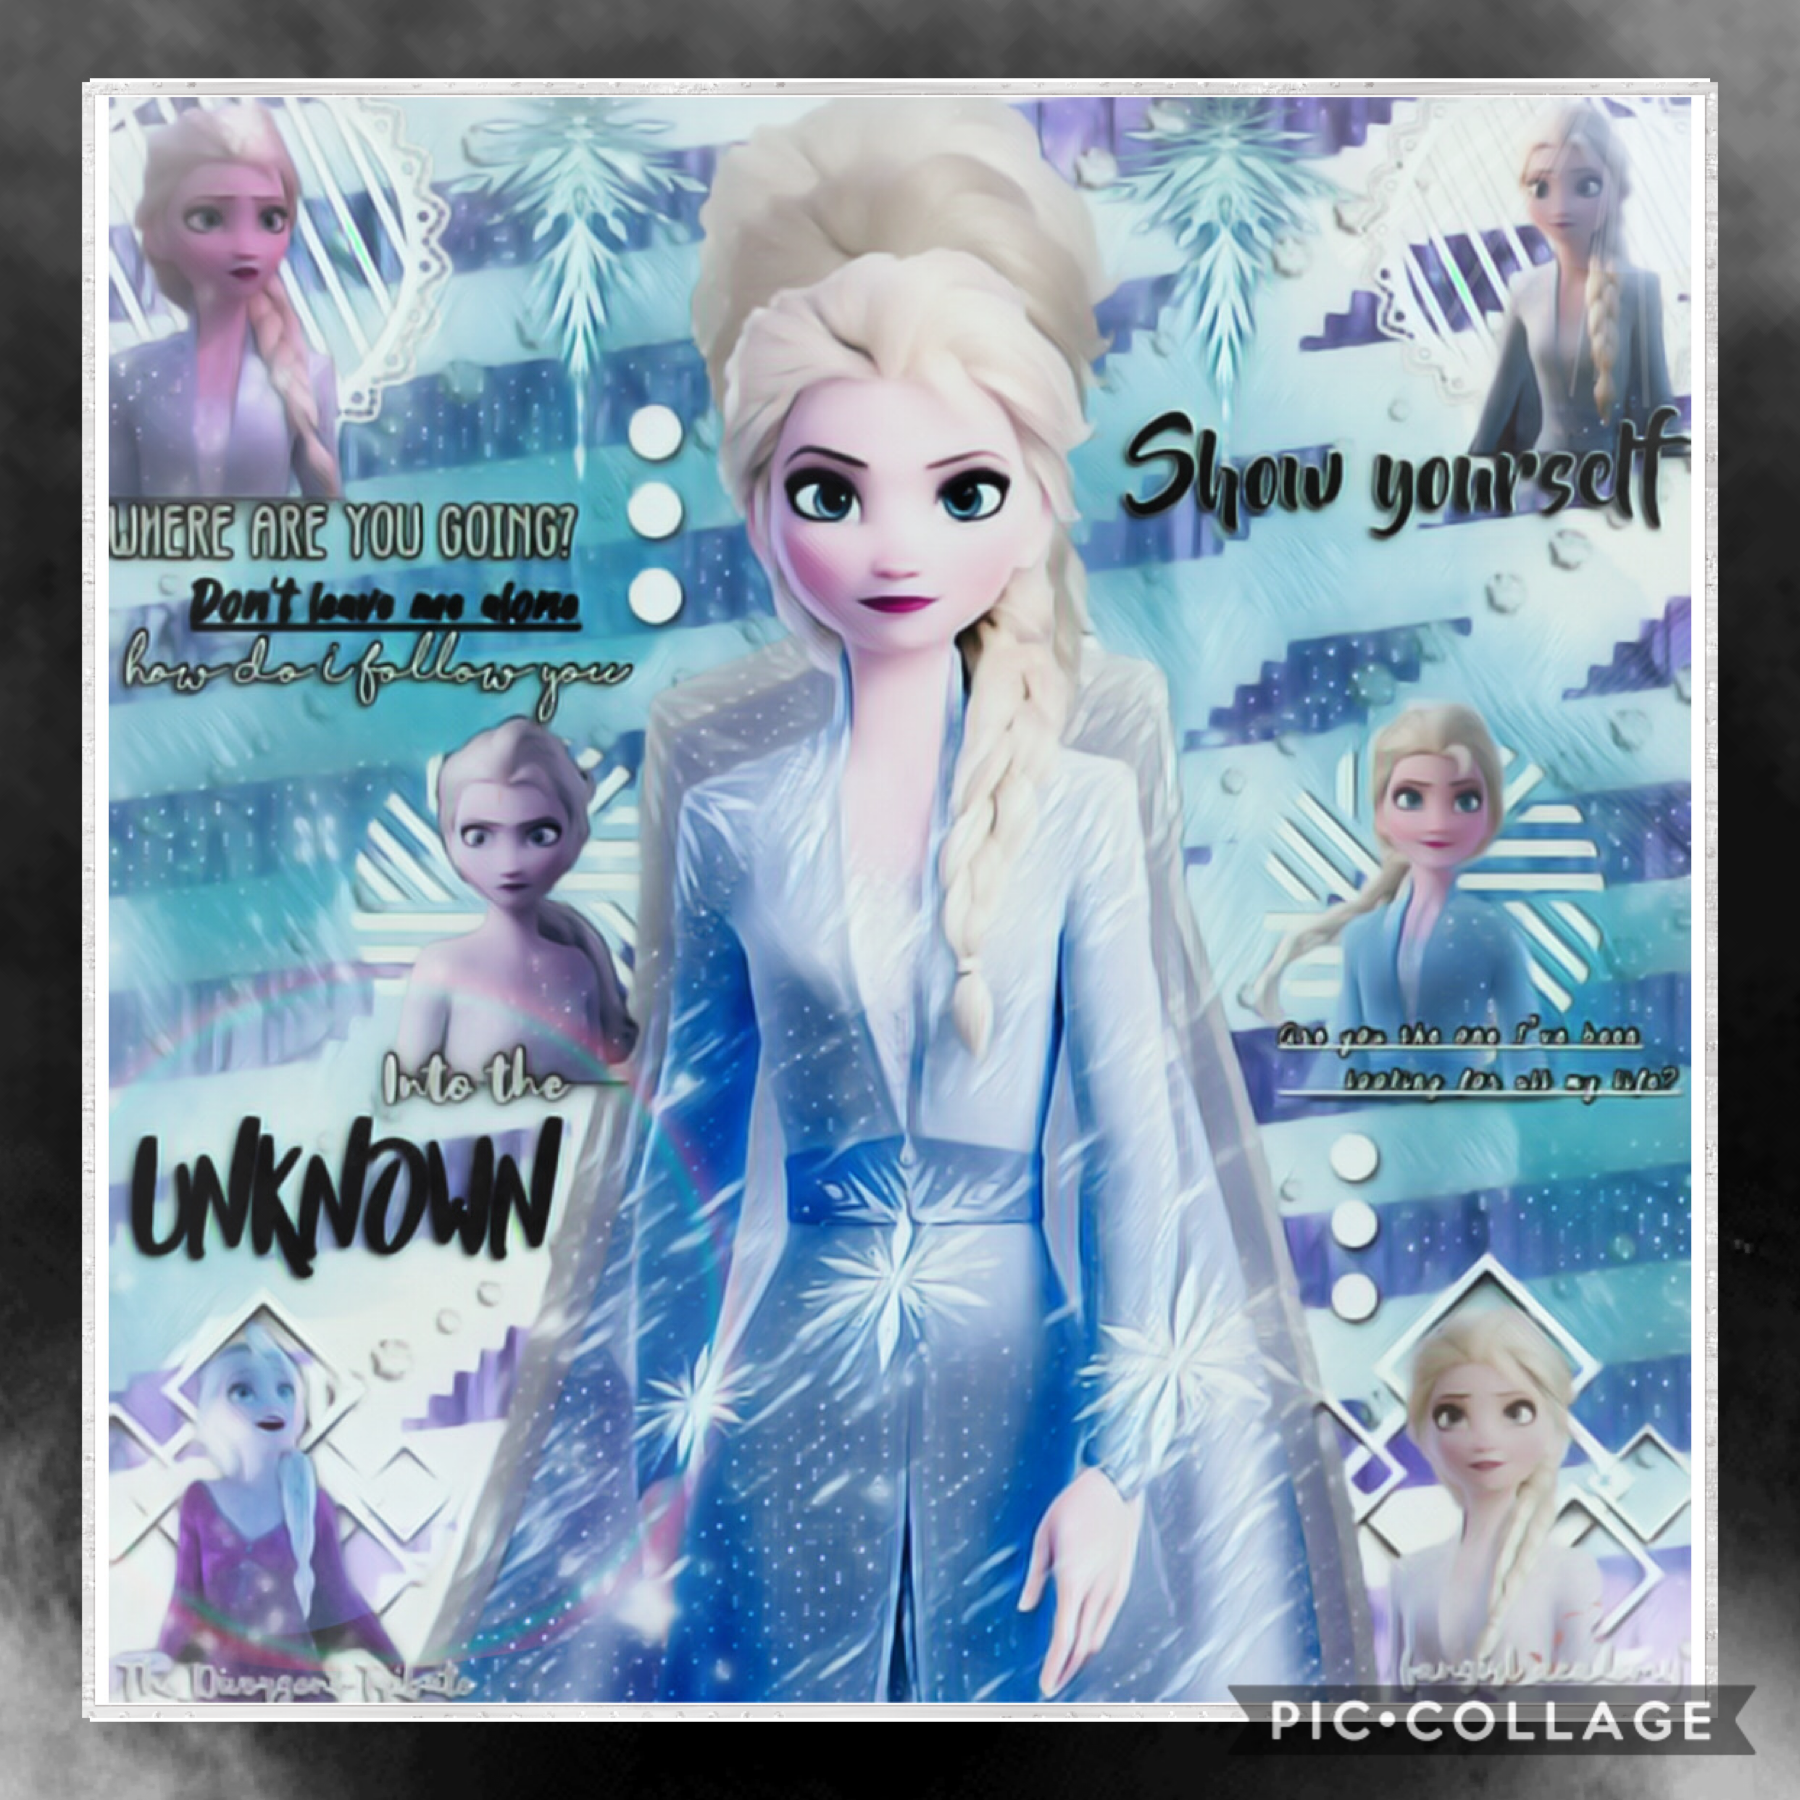 Staring my Frozen 2 theme with Elsa!! I absolutely LOVE her in the new movie (I won’t spoil—I promise 😉). Please tell me what you think!
QOTD: Have you seen Frozen 2 yet?
AOTD: Yes!
❄️Rate /10?❄️